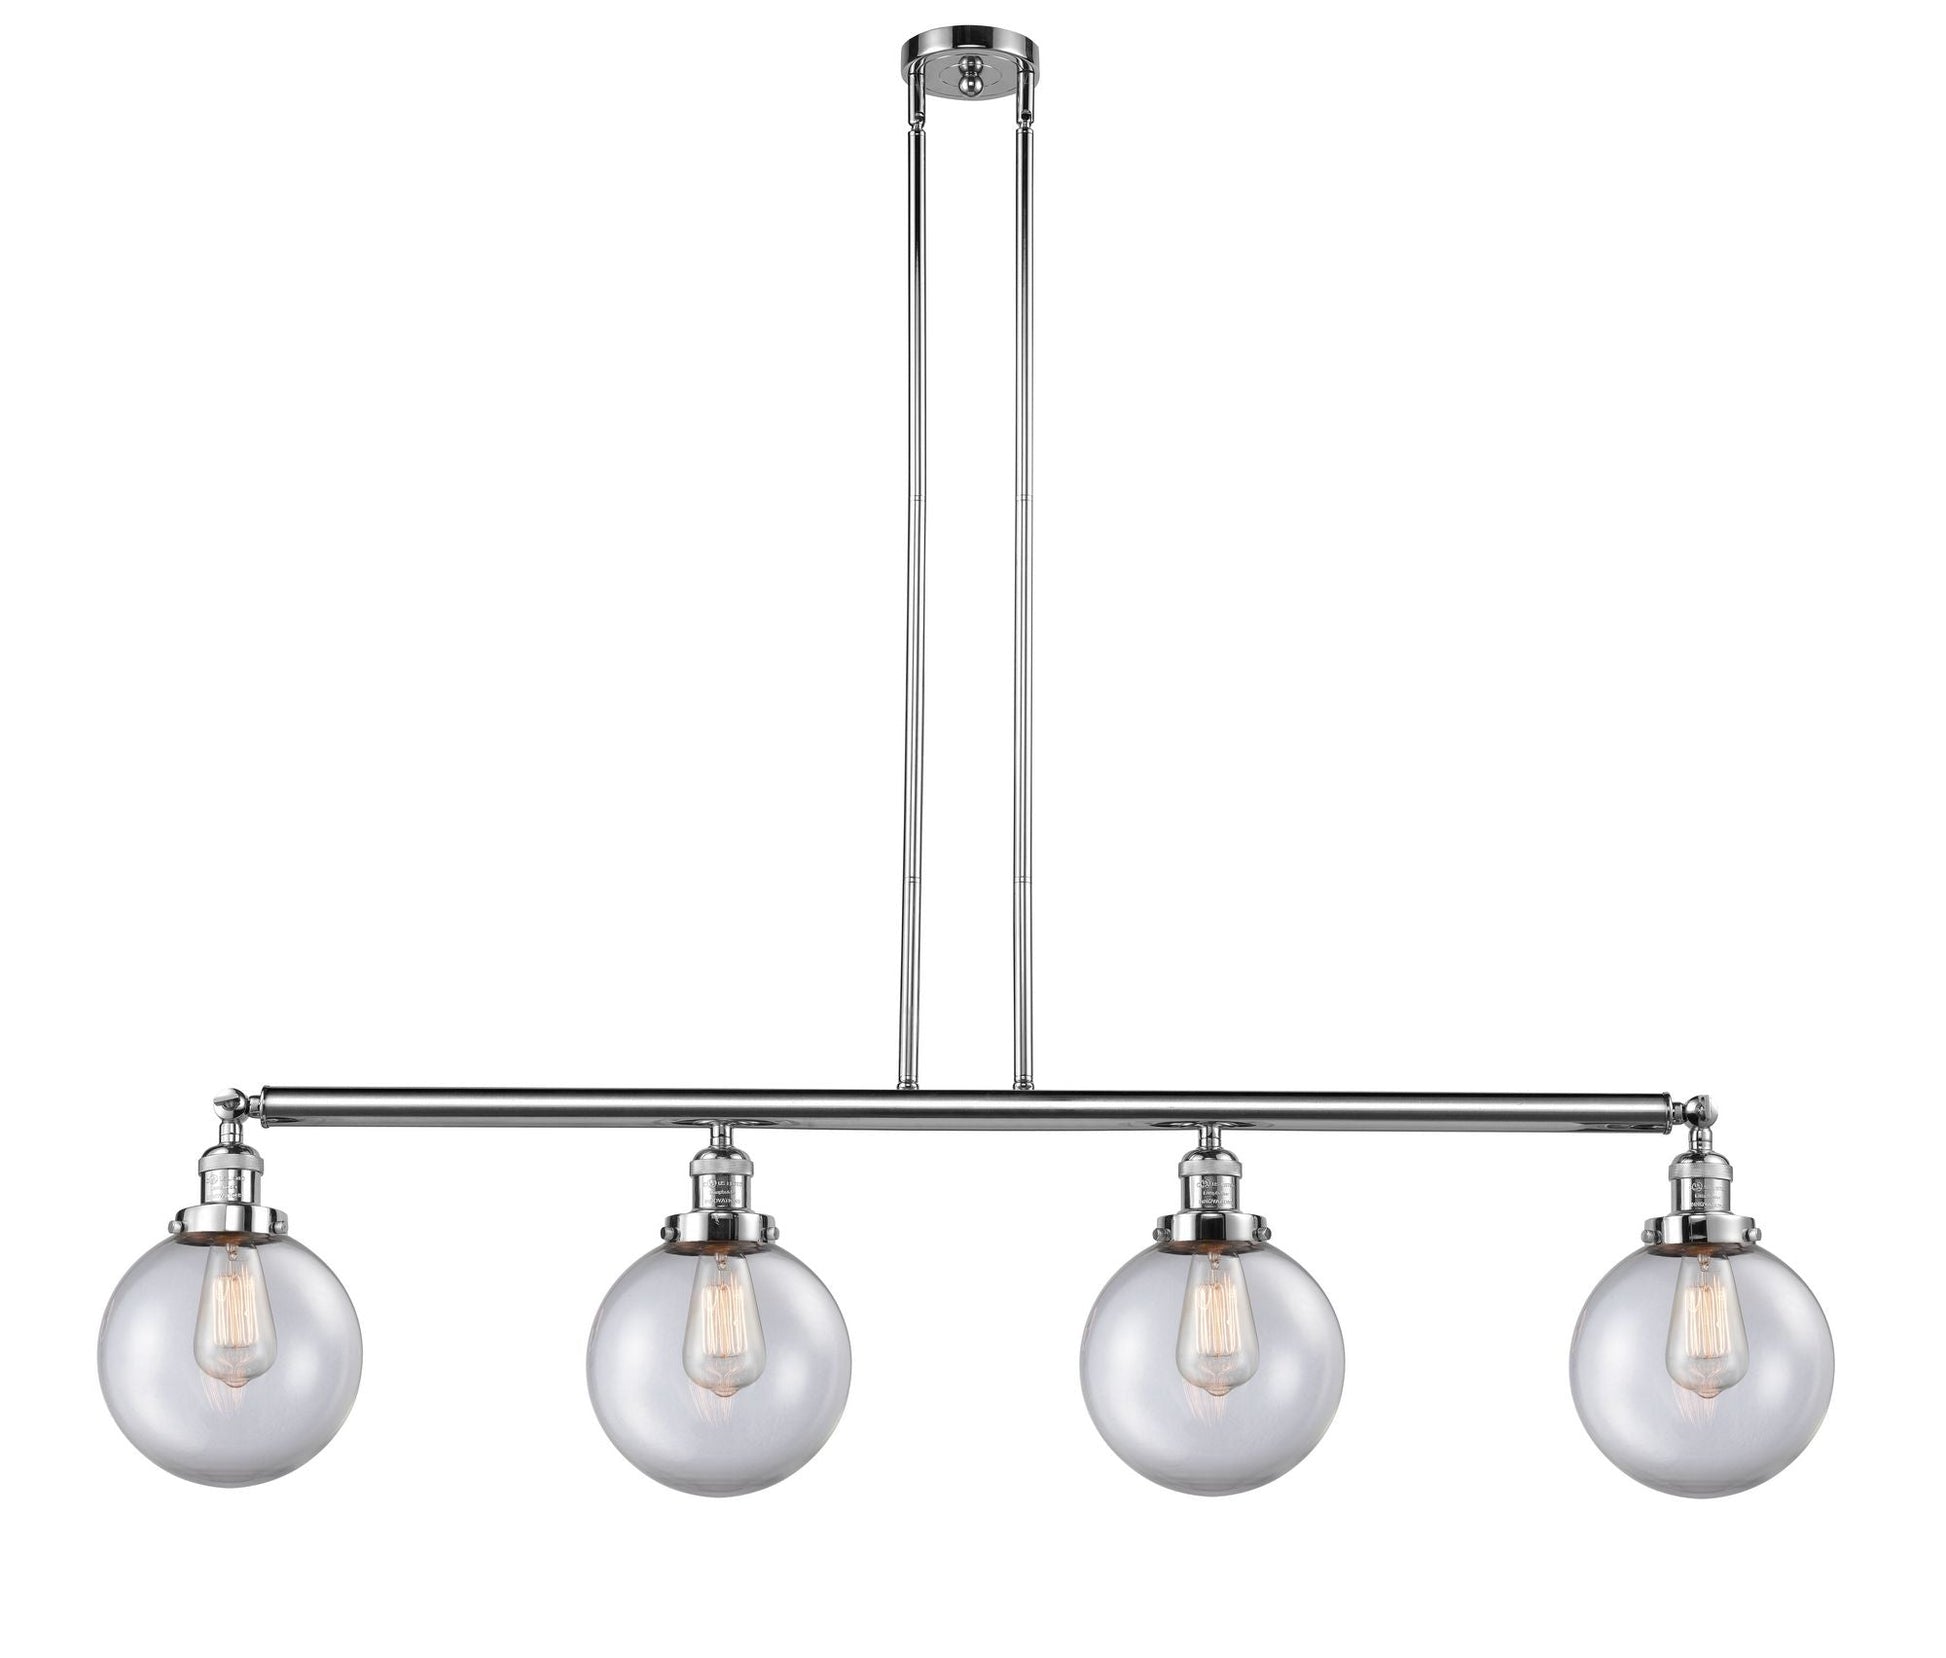 214-PC-G202-8 4-Light 52.625" Polished Chrome Island Light - Clear Beacon Glass - LED Bulb - Dimmensions: 52.625 x 8 x 12.875<br>Minimum Height : 22<br>Maximum Height : 46 - Sloped Ceiling Compatible: Yes